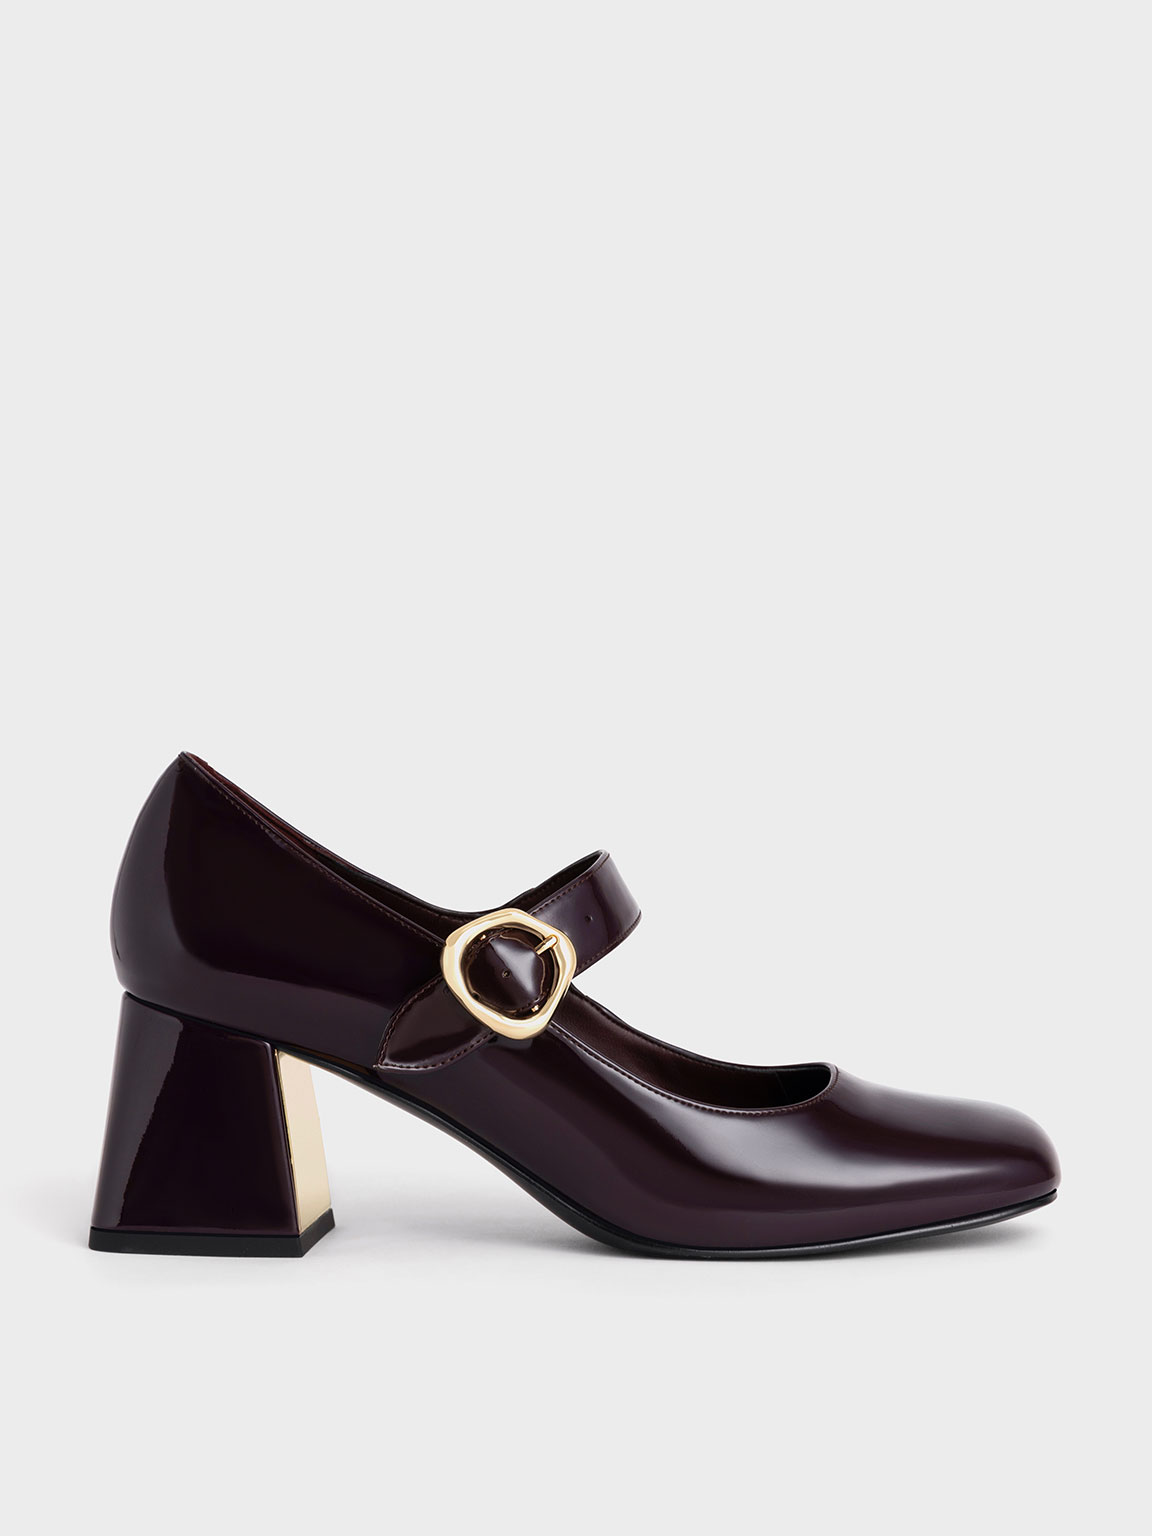 Patent Buckled Mary Jane Pumps